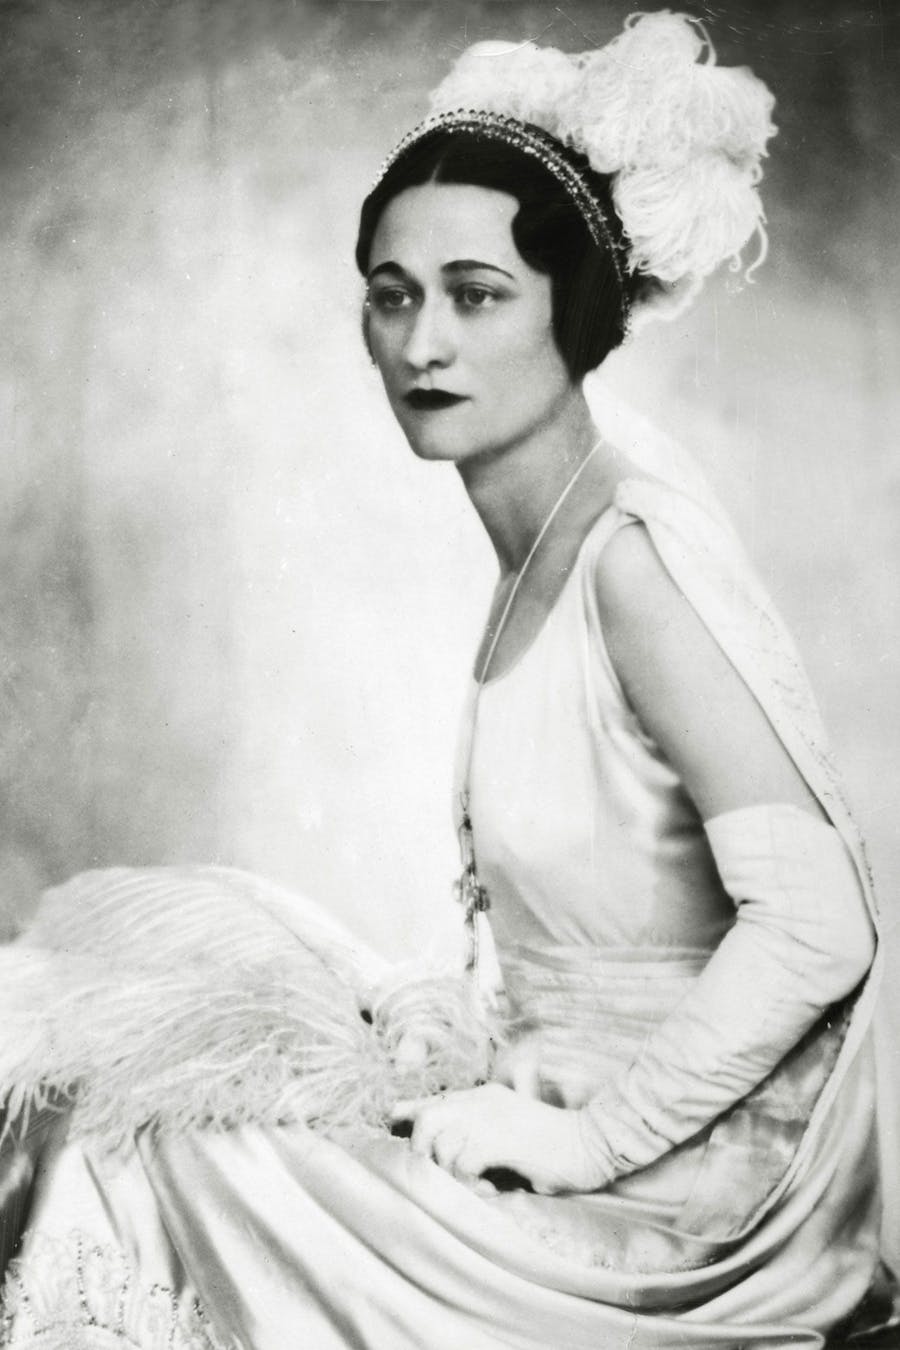 Portrait of Wallis Simpson taken in the gown she wore when presented at court, 1930s. Photo public domain